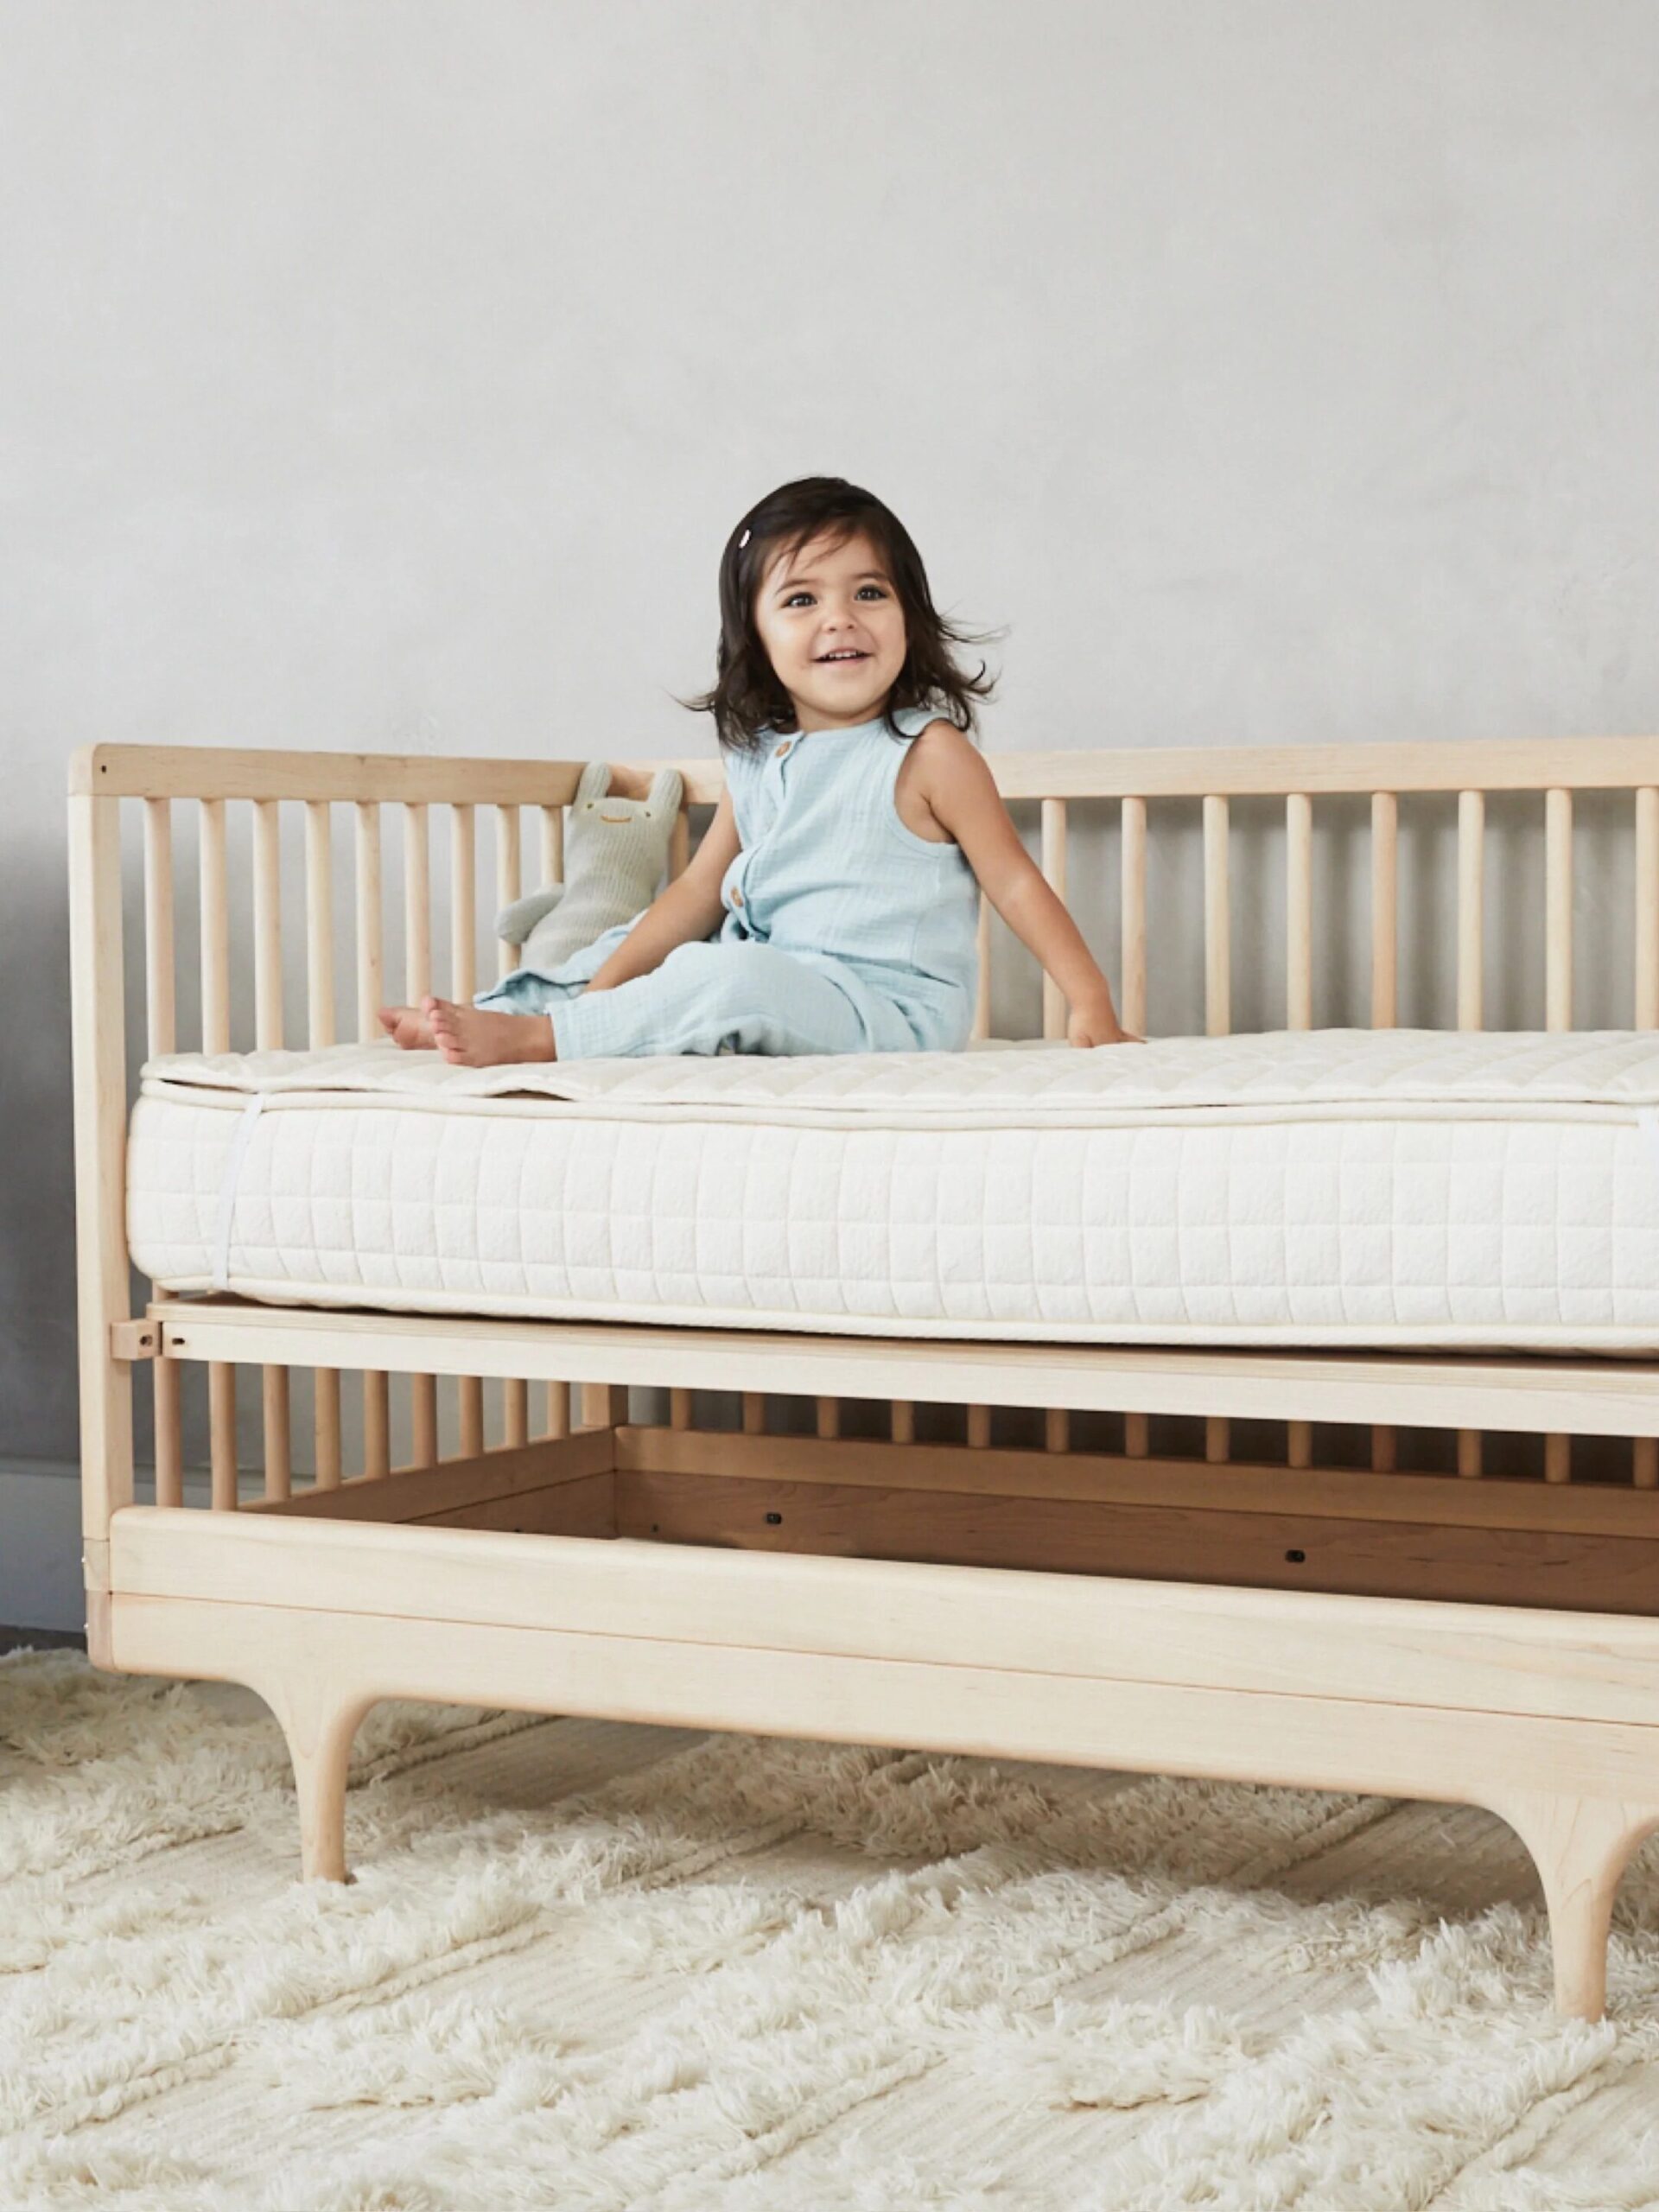 A smiling child sits on a wooden toddler bed in a neutrally decorated room.